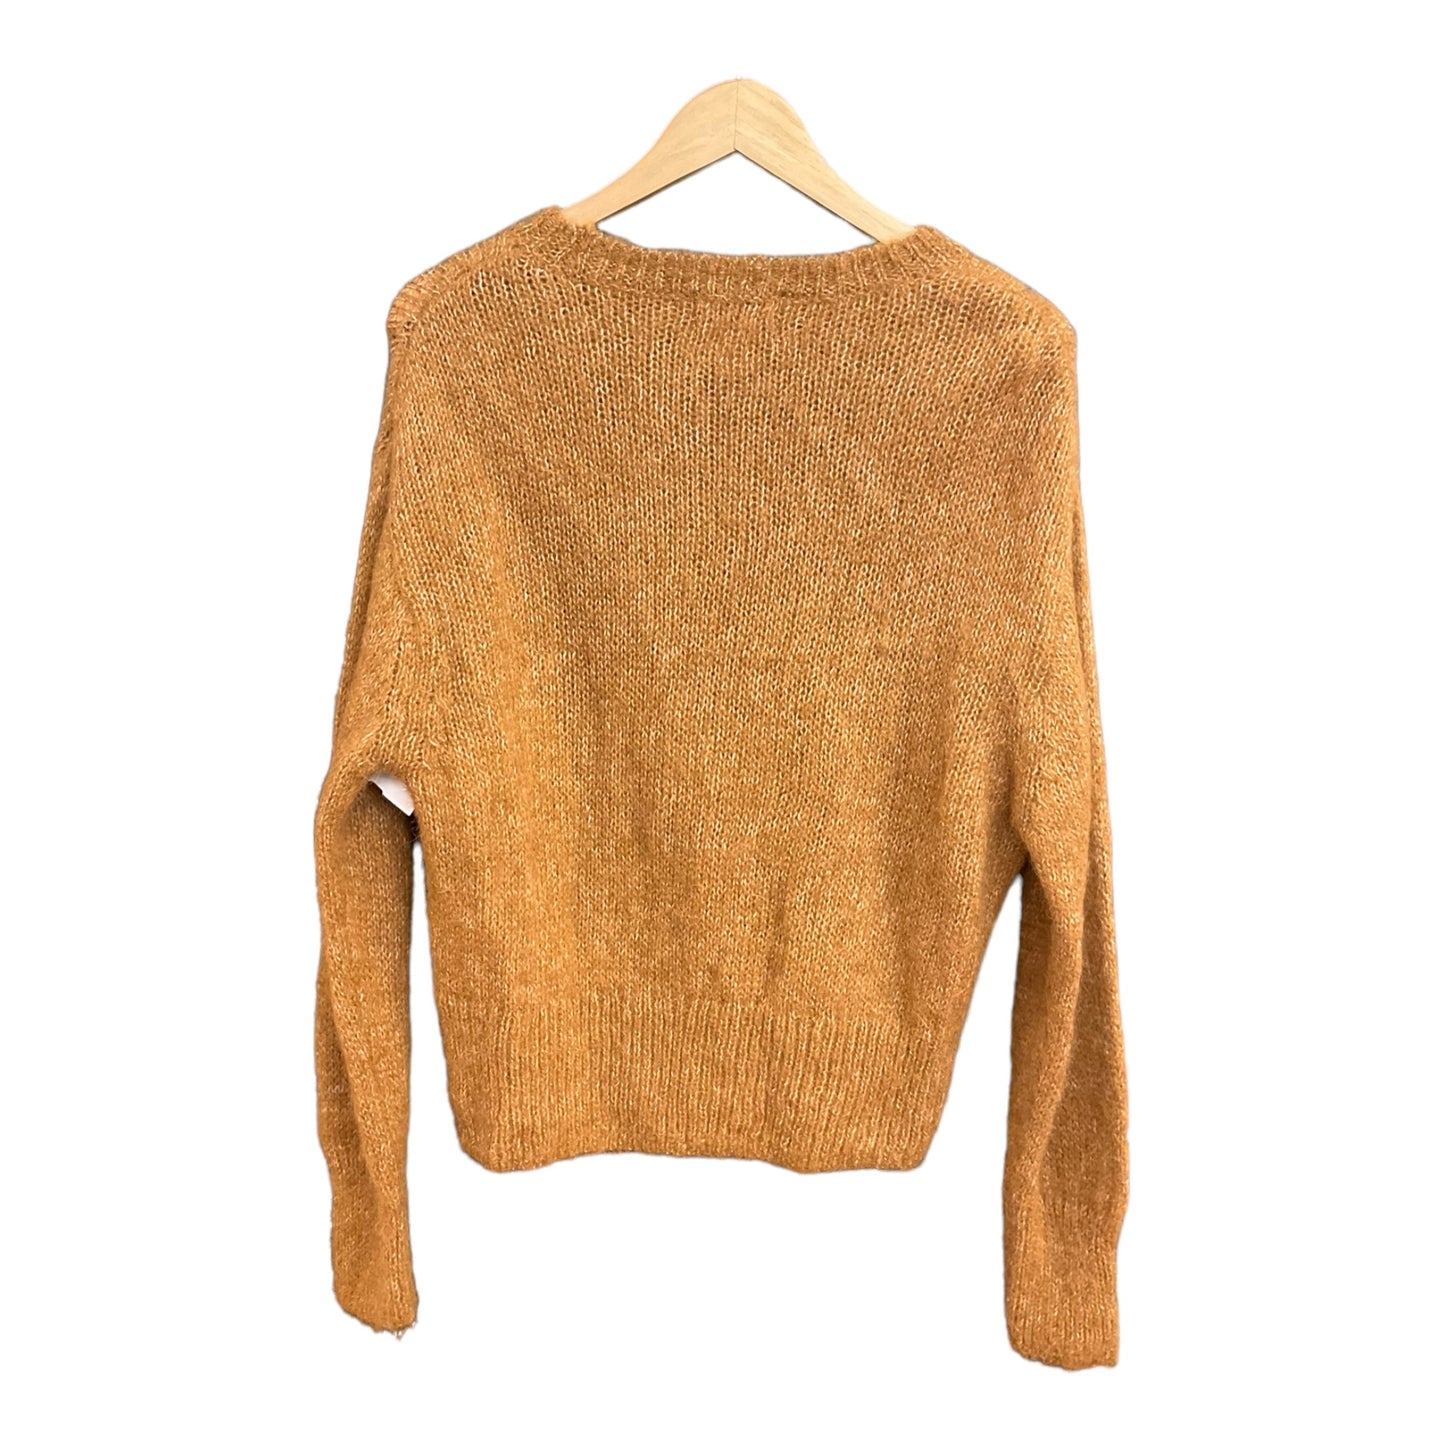 Sweater By H&m  Size: S